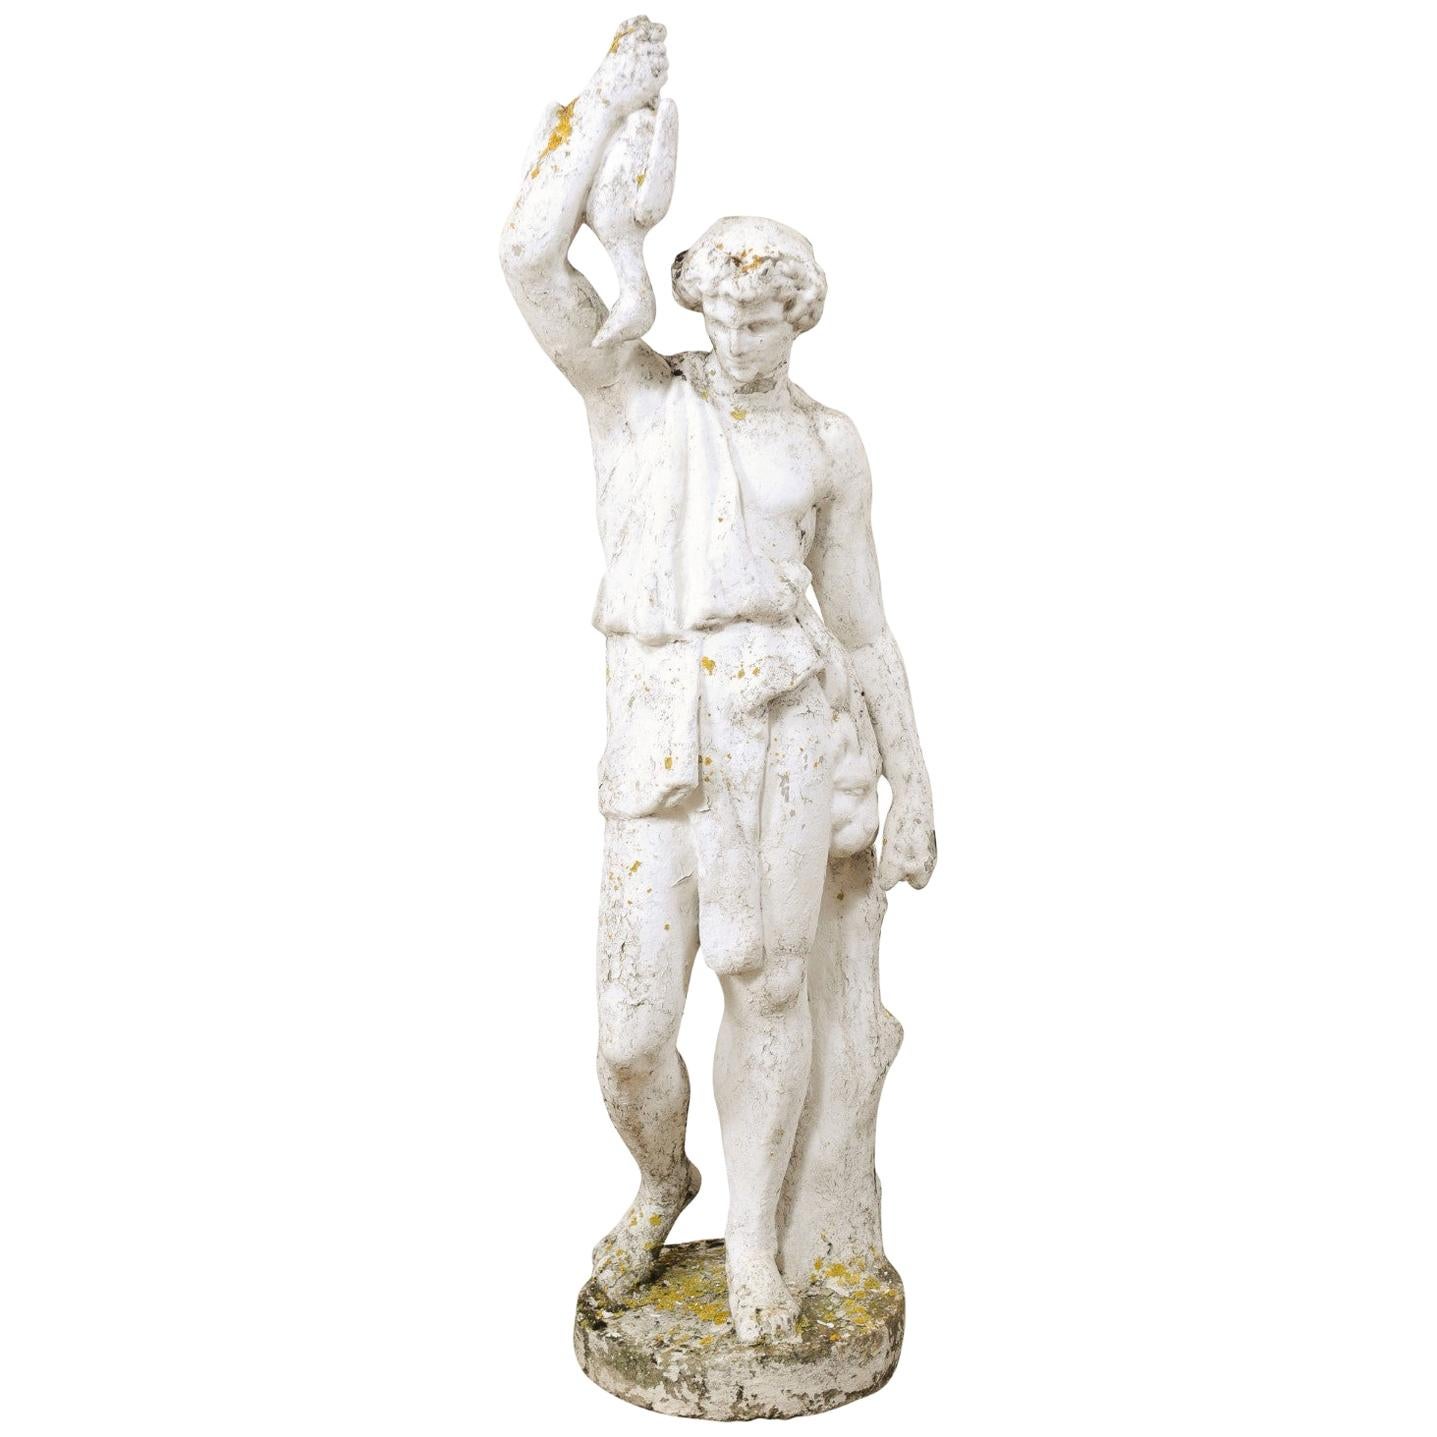 Classical Tall French Garden Sculpture of Male Figure from Early 20th Century For Sale